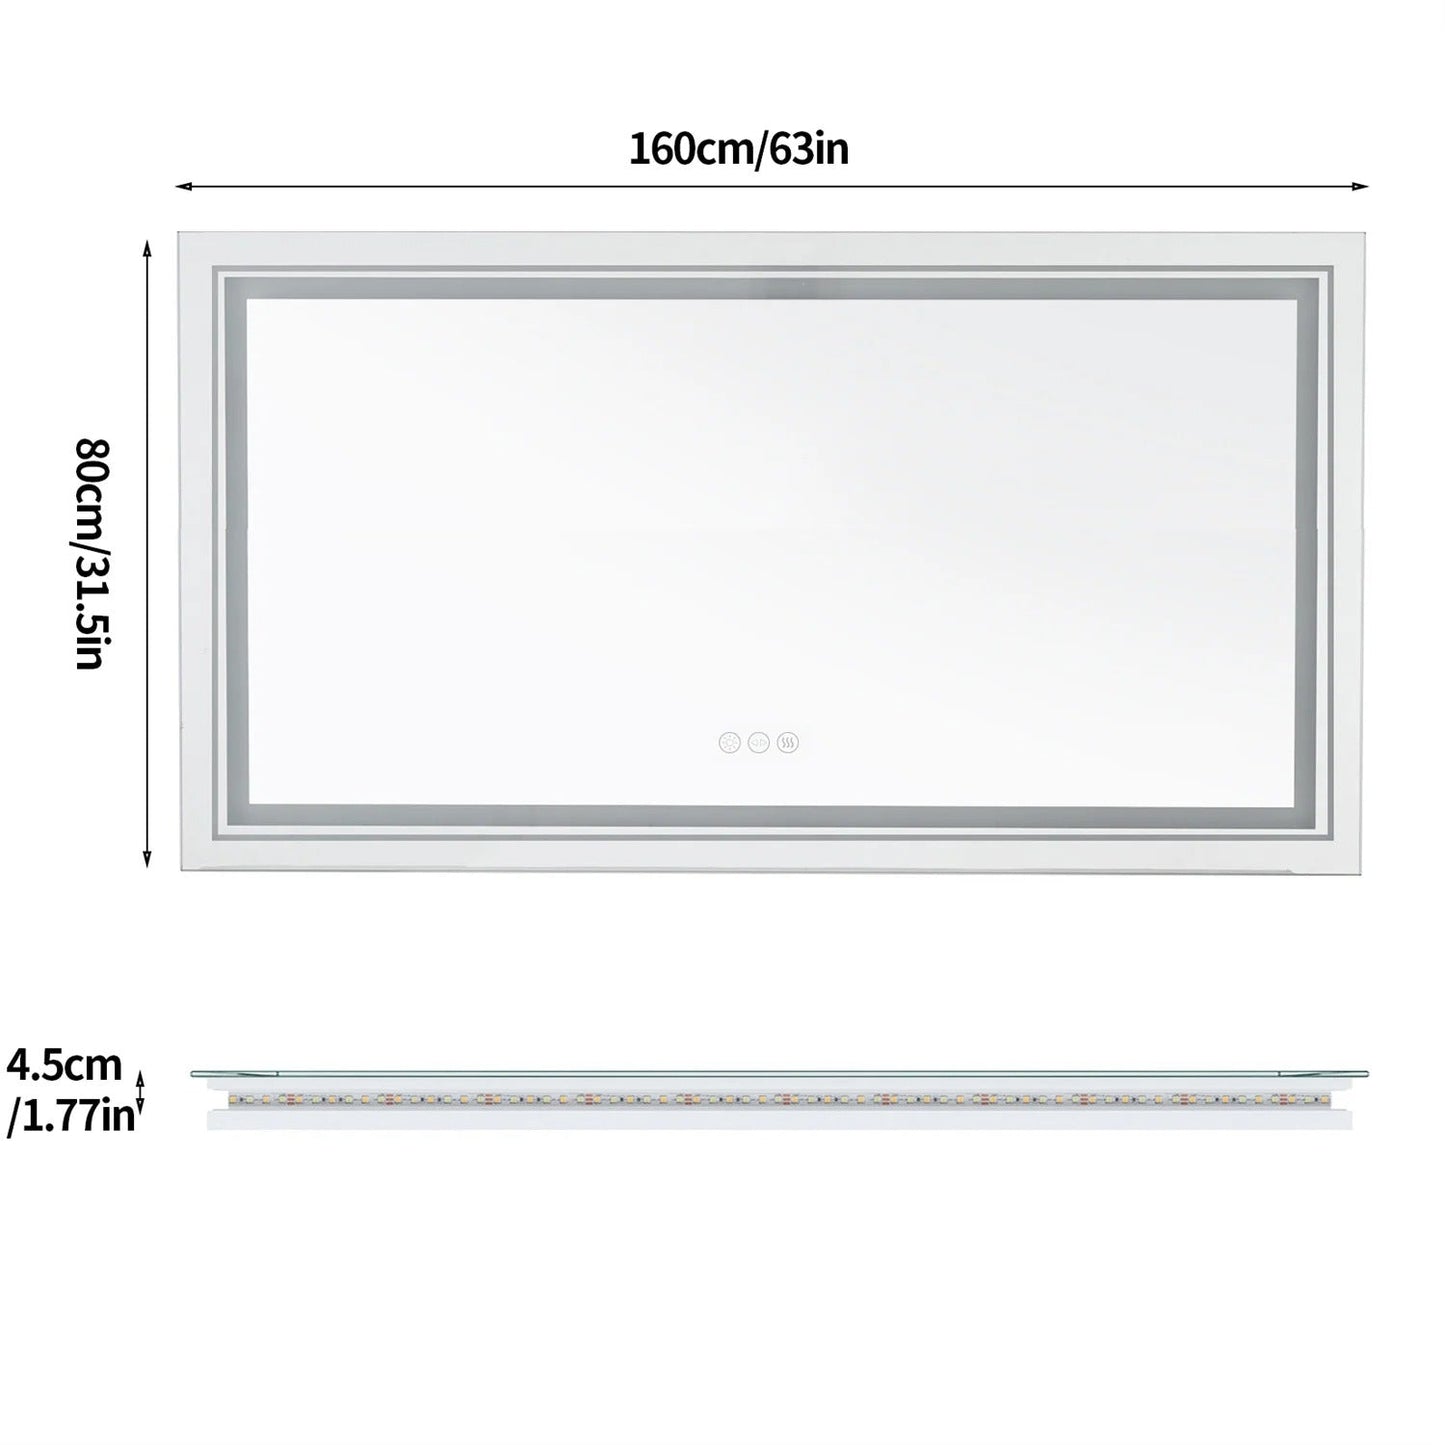 160cm x 80cm Extra Large LED Light Backlit Bathroom Mirror Dual Lights Anti-Fog Memory 3 Colors Dimmable With Touch Button